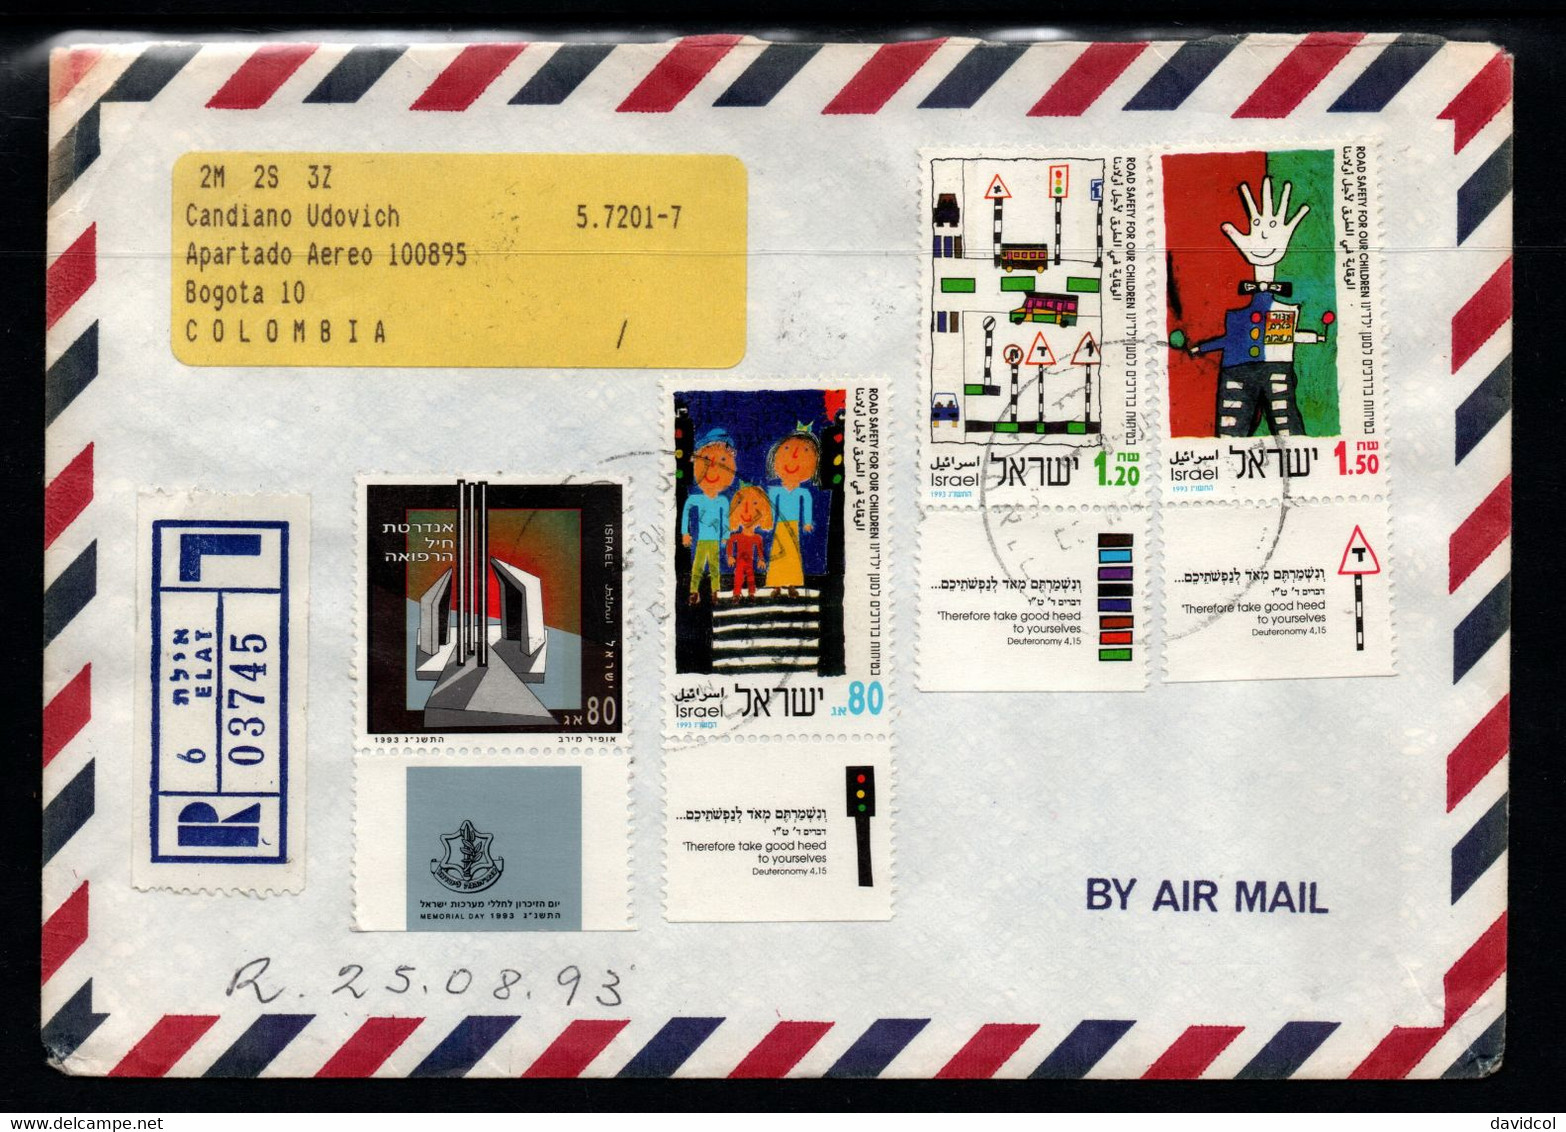 CA425- COVERAUCTION!!! - ISRAEL- ELAT  TO COLOMBIA (21-AG-93) - MEMORIAL DAY - Covers & Documents